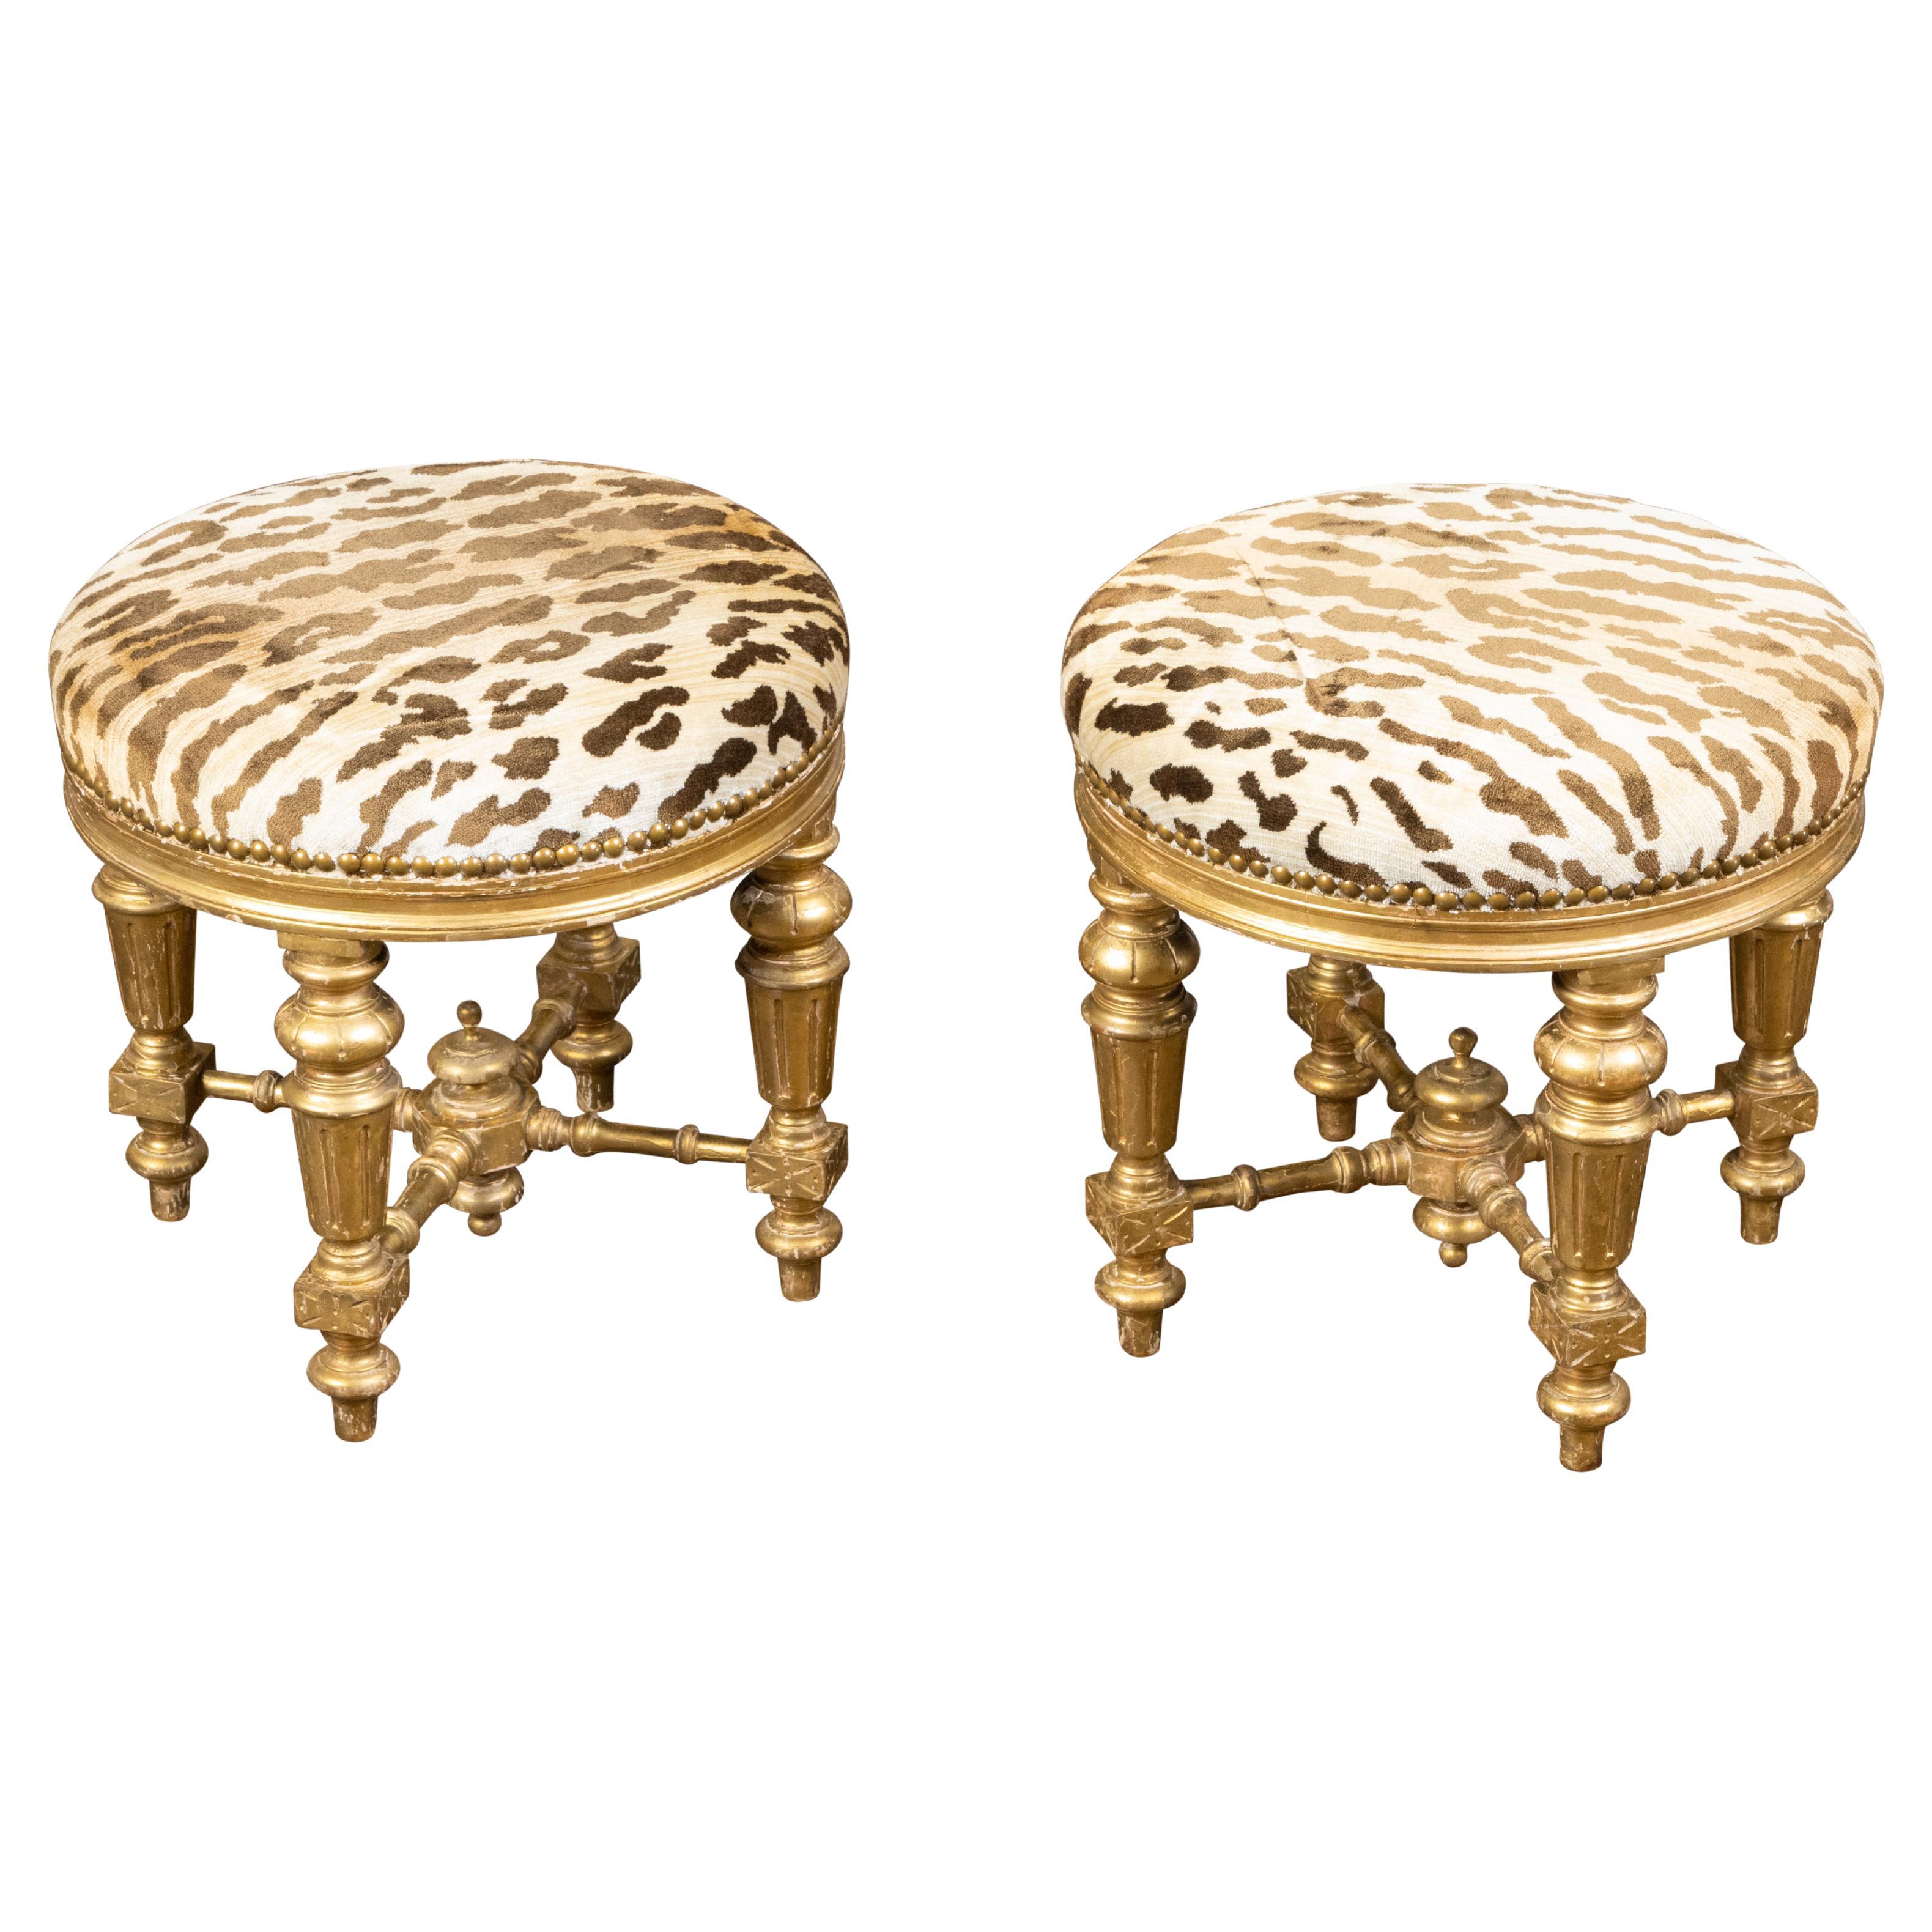 Pair of 19th Century French Giltwood Stools with Fluted Legs and Upholstery For Sale